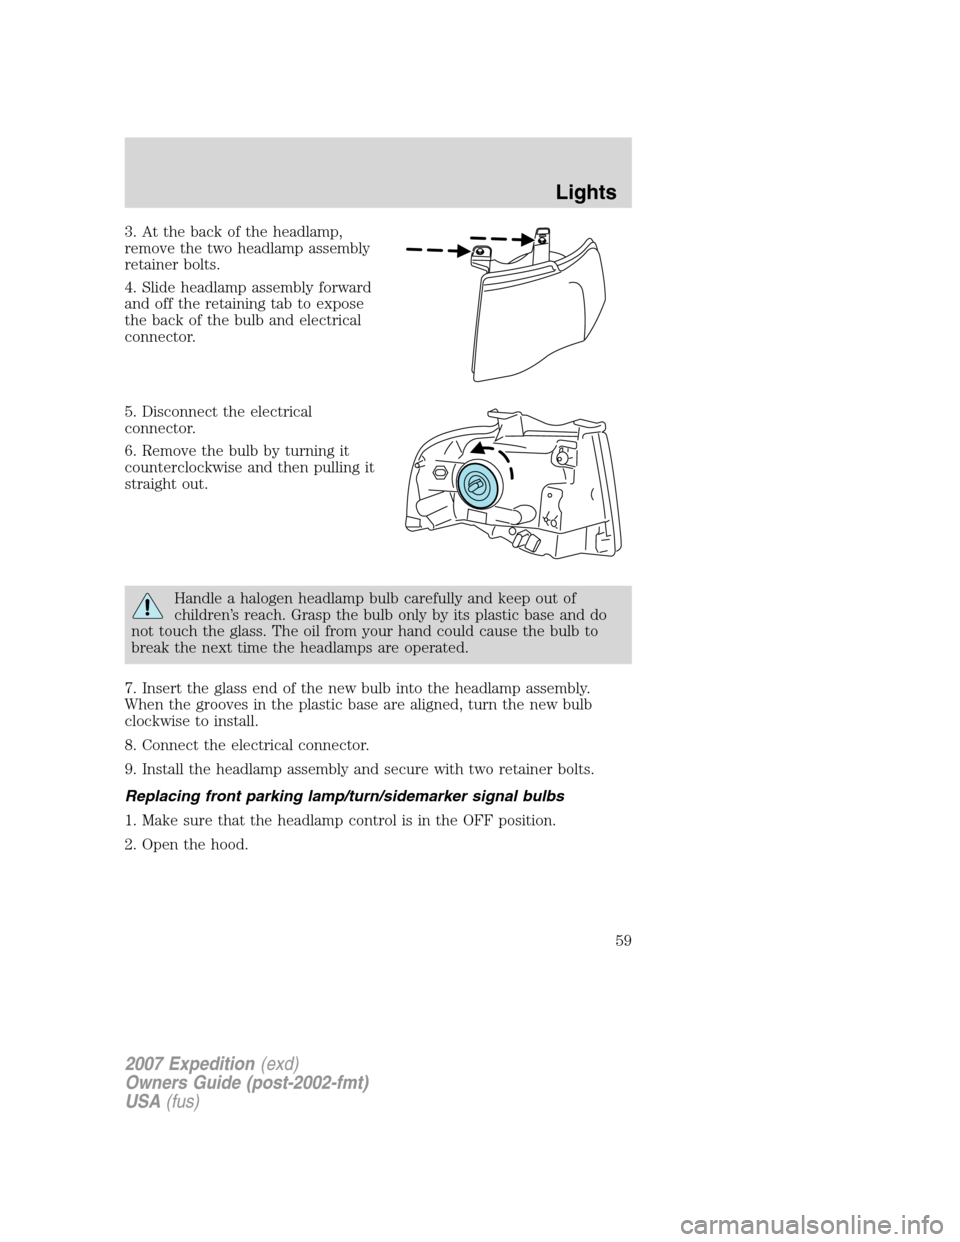 FORD EXPEDITION 2007 3.G Owners Manual 3. At the back of the headlamp,
remove the two headlamp assembly
retainer bolts.
4. Slide headlamp assembly forward
and off the retaining tab to expose
the back of the bulb and electrical
connector.
5